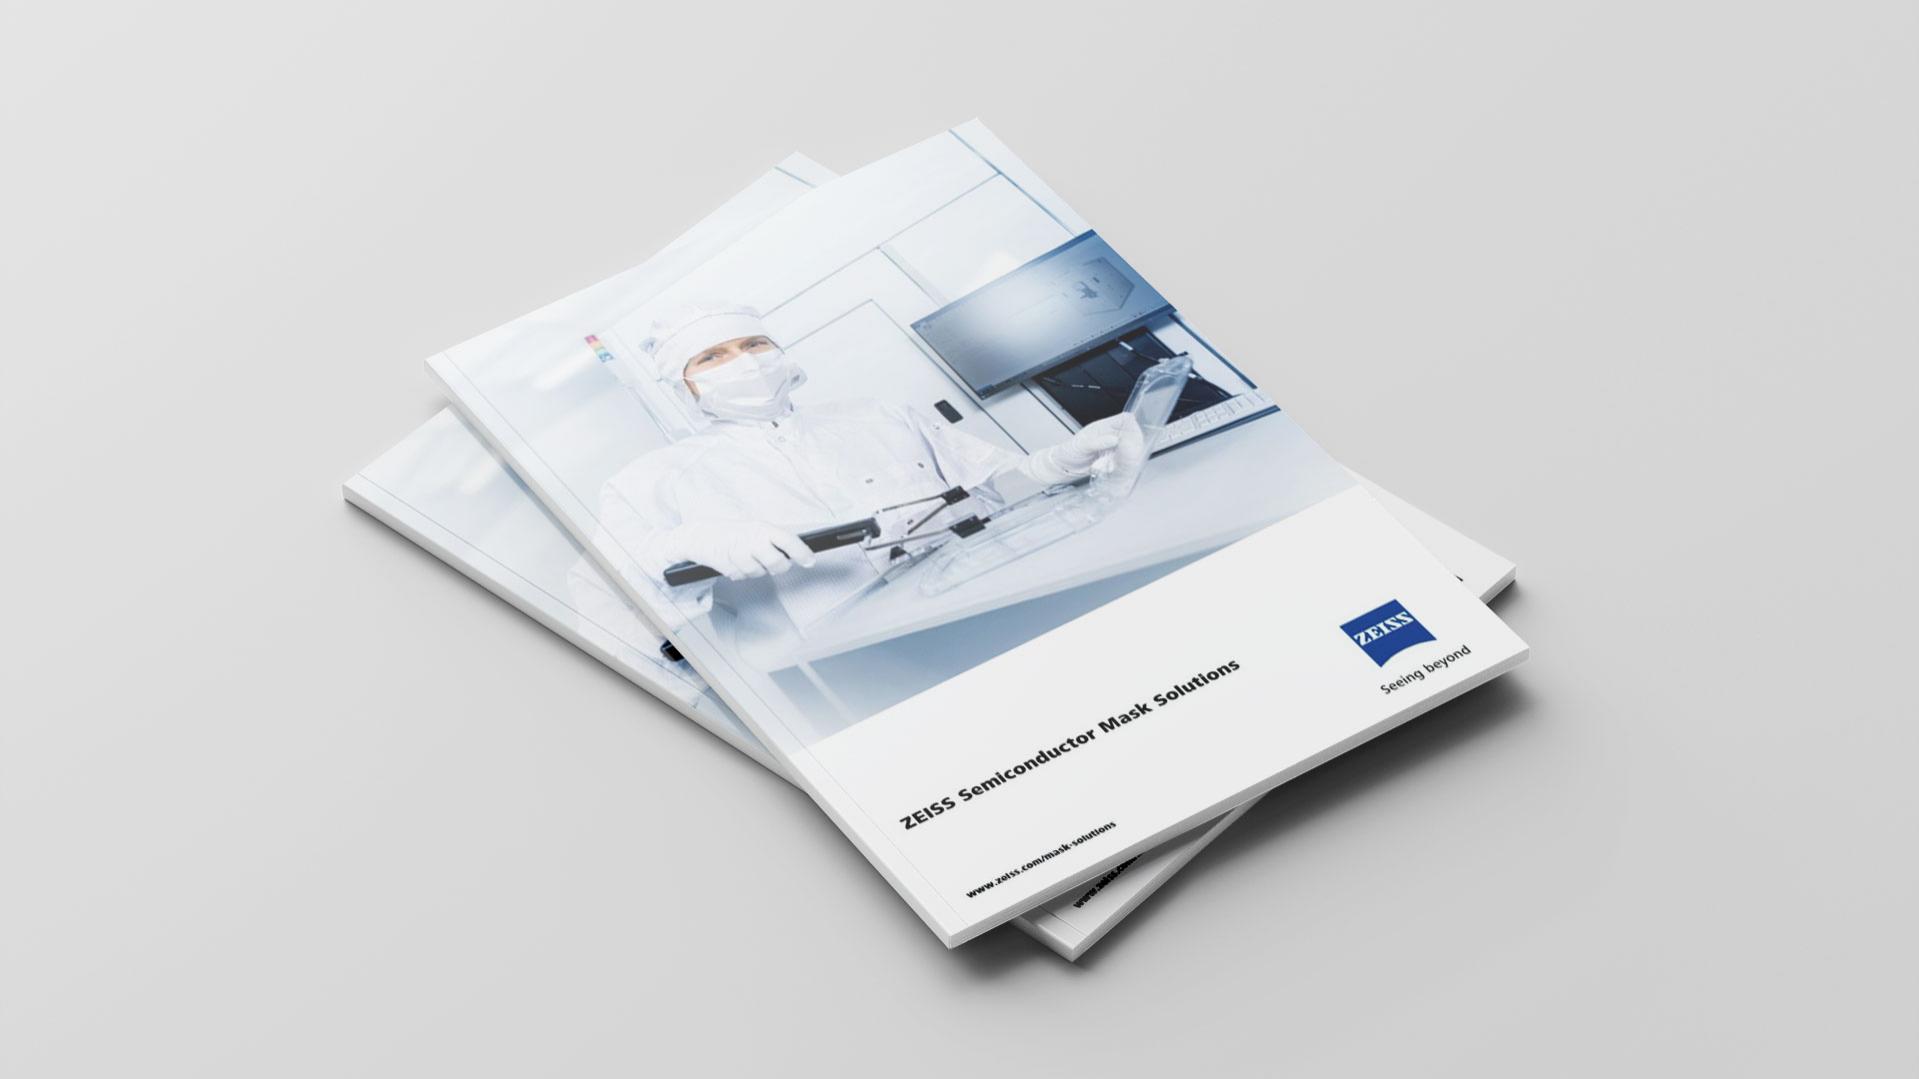 Several brochures of ZEISS SMT products